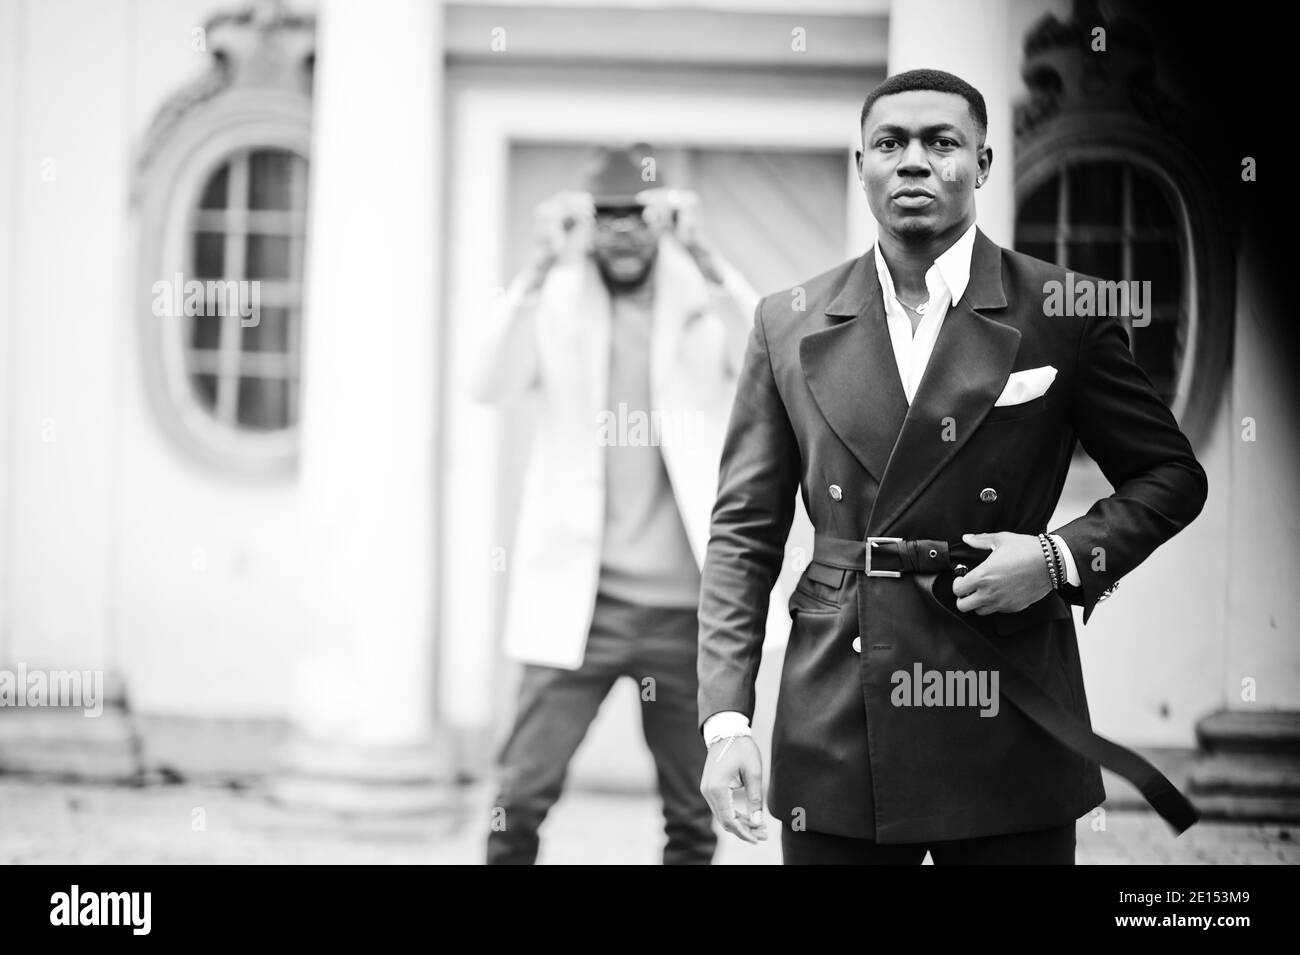 Two fashion black men. Fashionable portrait of african american male models. Wear suit, coat and hat. Stock Photo